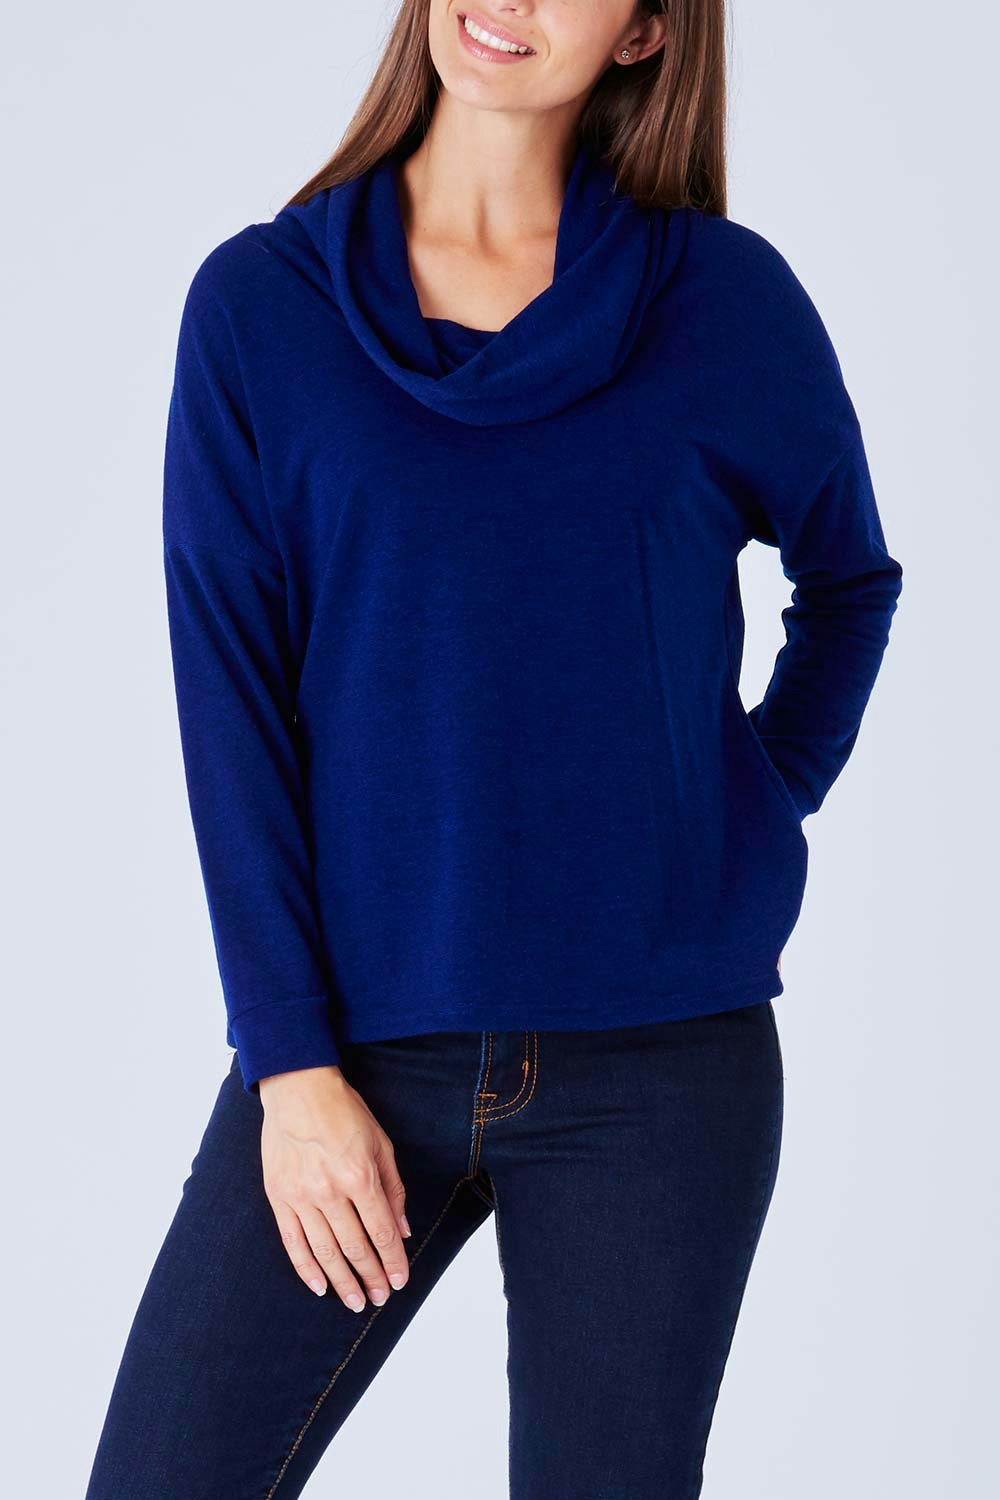 bird keepers The Cowl Neck Knit - Womens Jumpers at Birdsnest Fashion